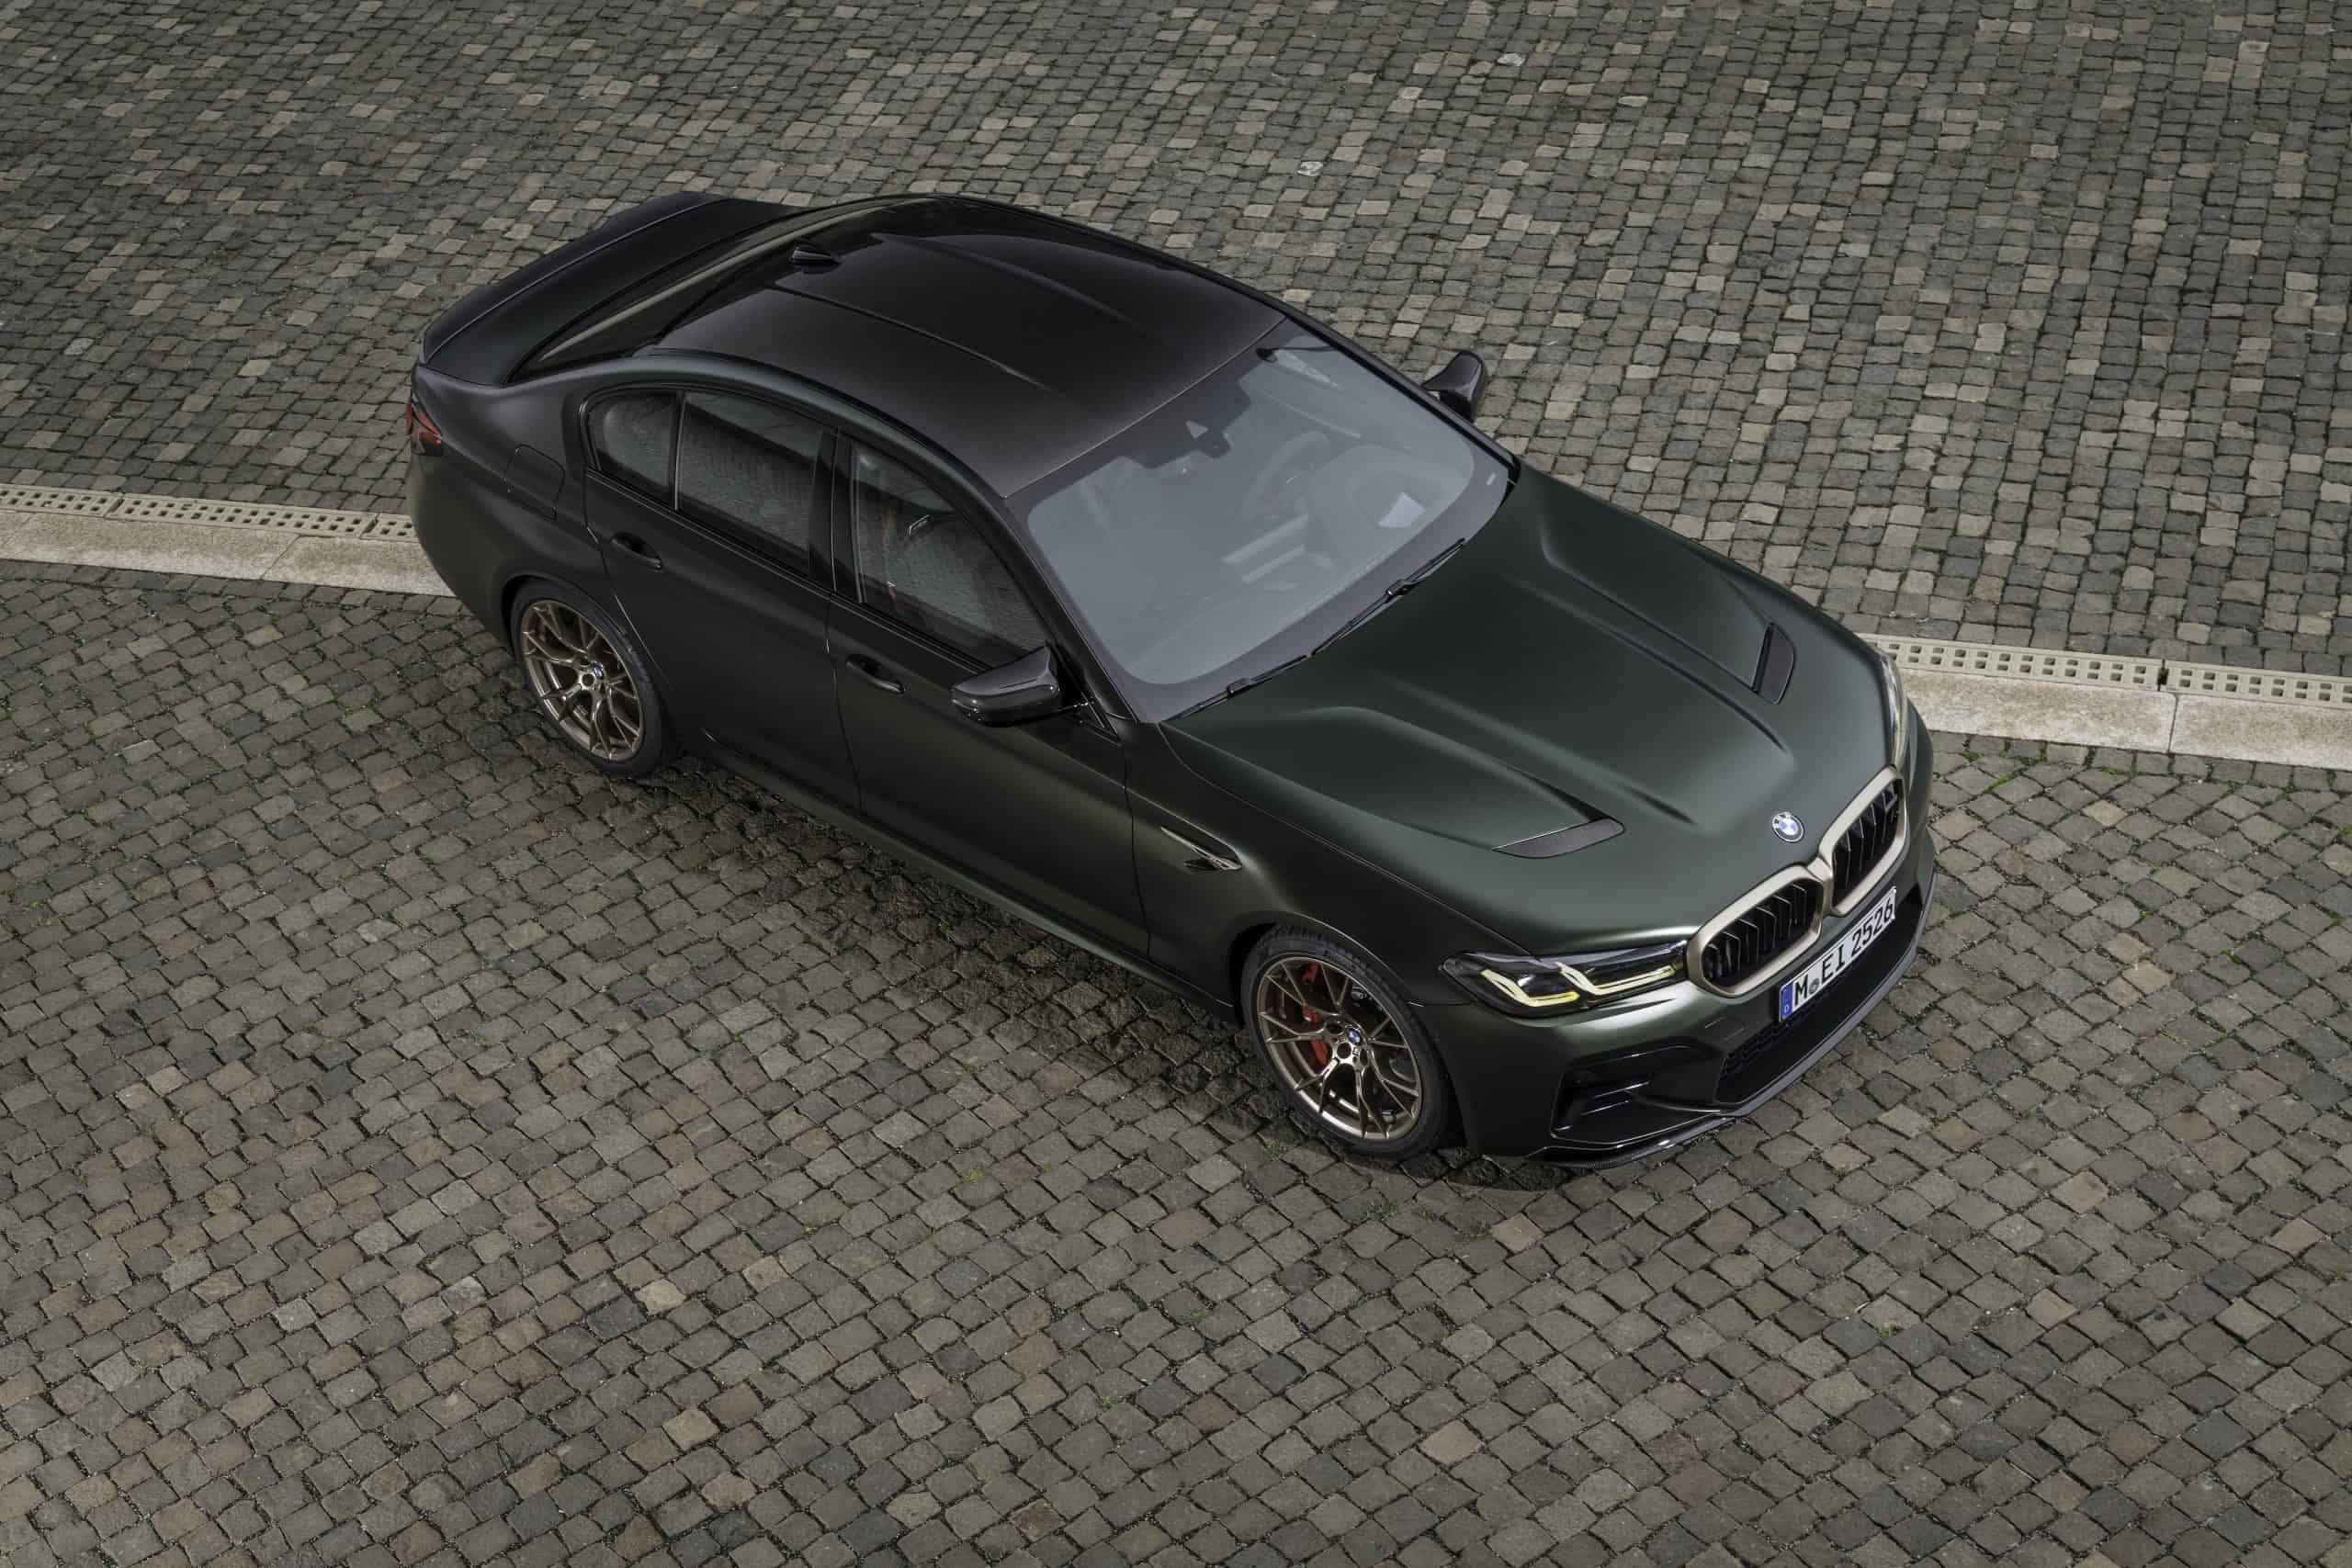 The New Bmw M5 Cs The Most Powerful Bmw M Car Ever Motoring Matters